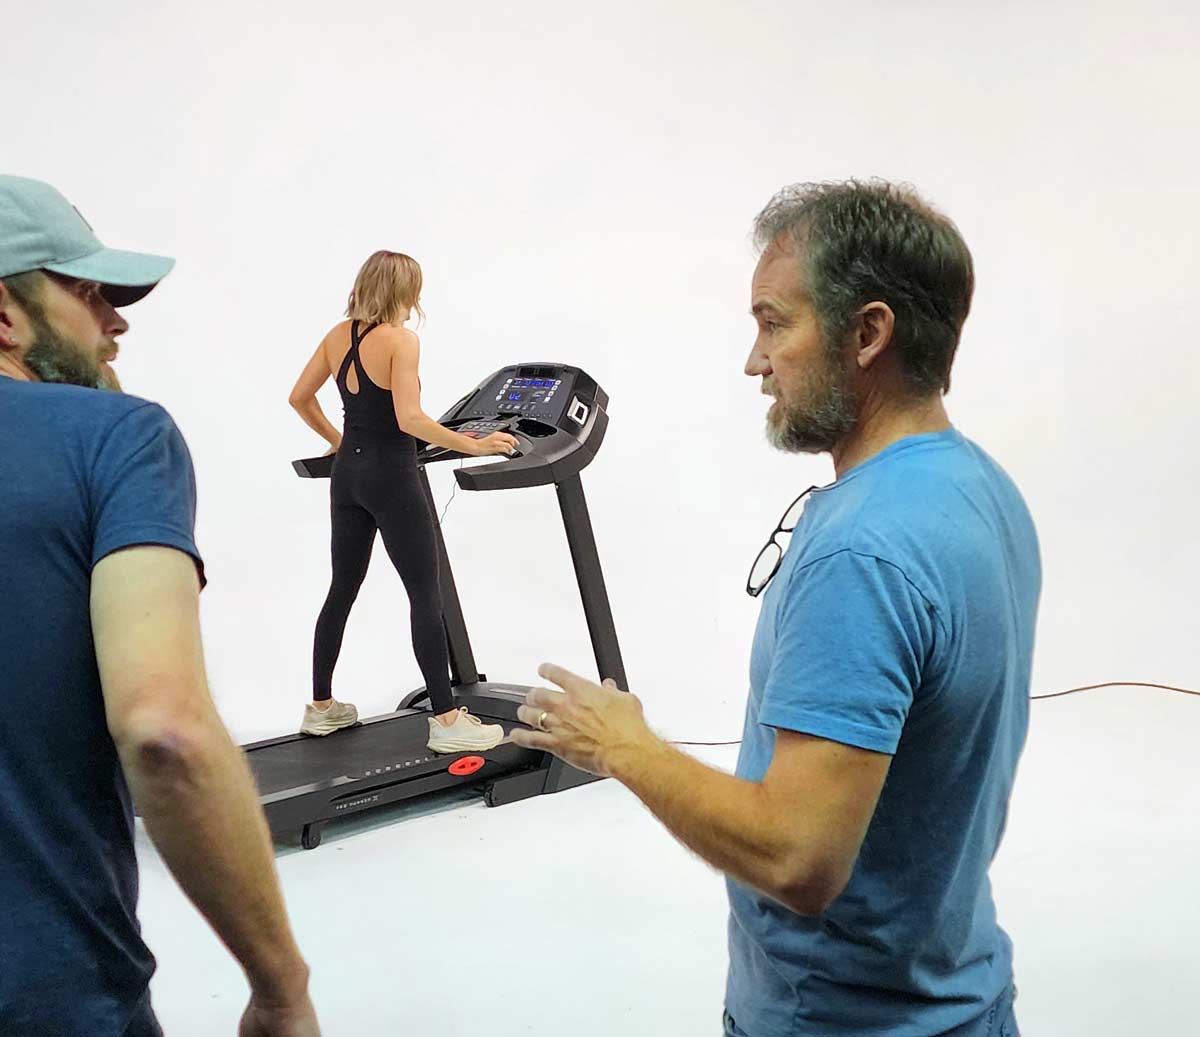 3G Cardio Photo Shoot with new products